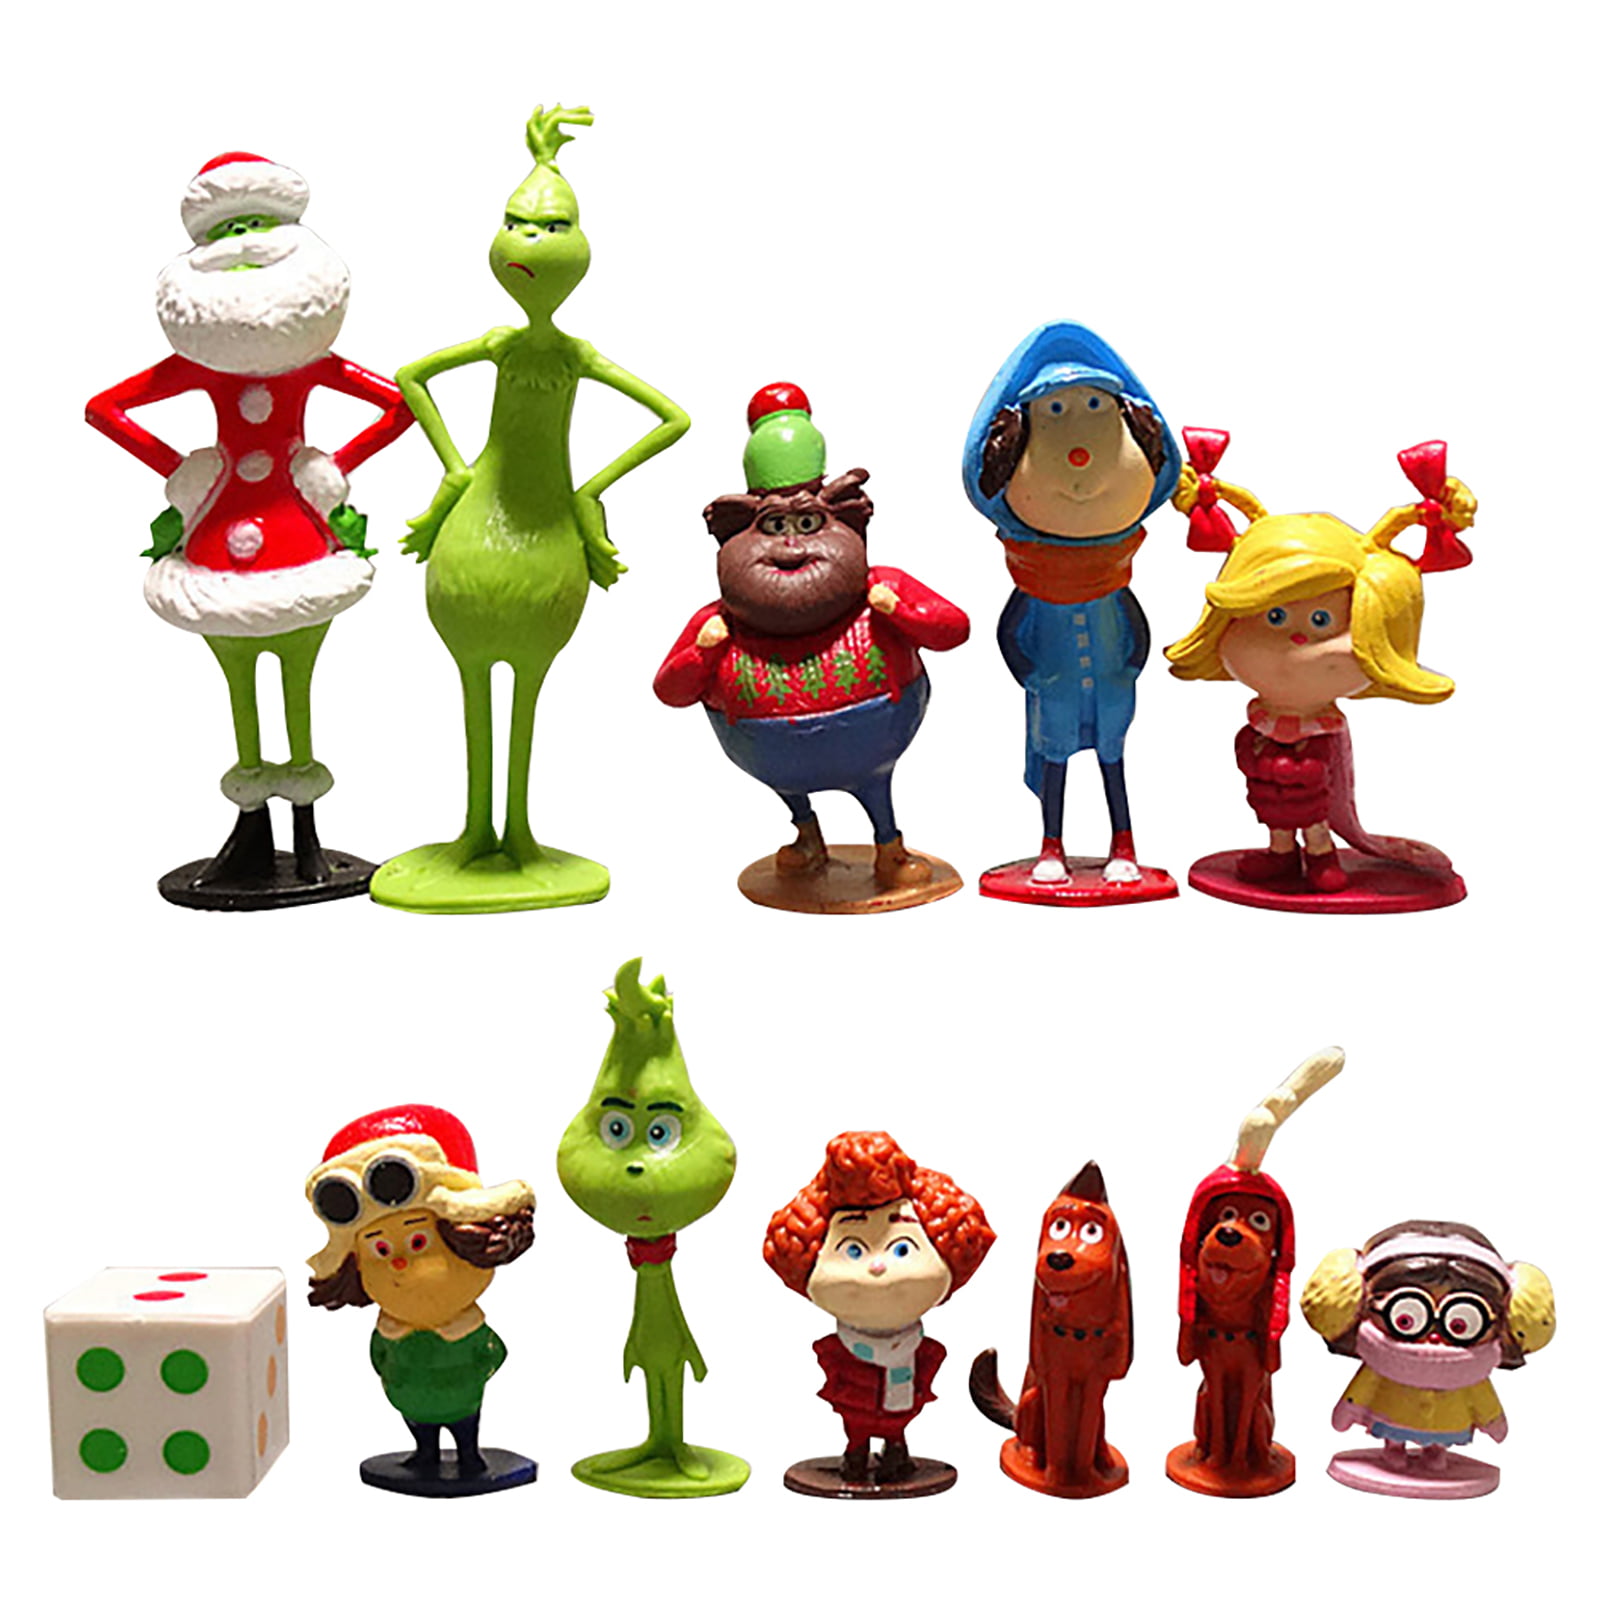 12pcs The Grinch Cartoon Figure Set Movie Character Gift Christmas Decor  For Kids  